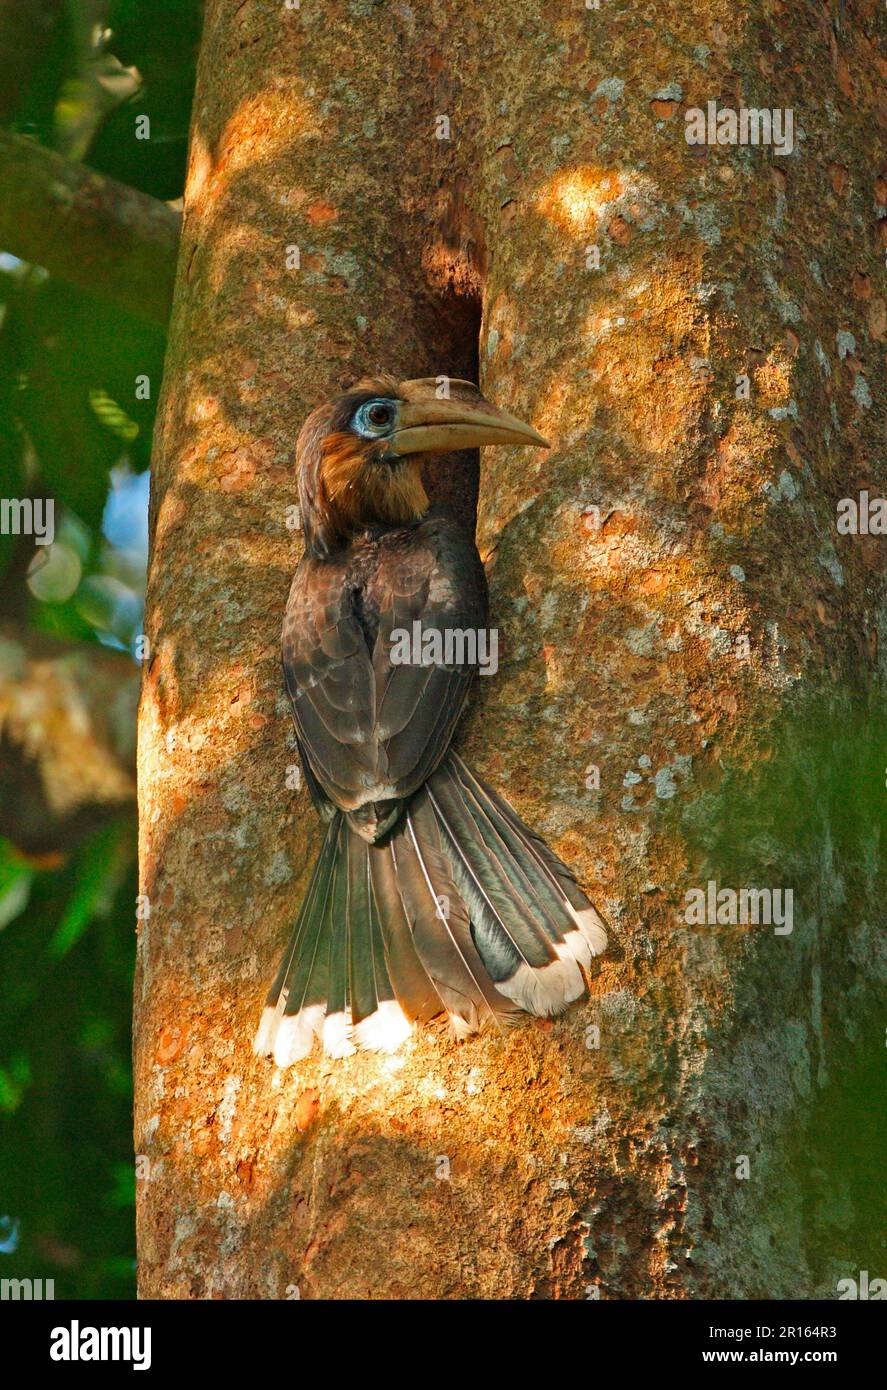 Tickell's Brown Hornbill (Anorrhinus tickelli), adult male, visiting nest hole in tree trunk, Kaeng Krachan N. P. Thailand Stock Photo